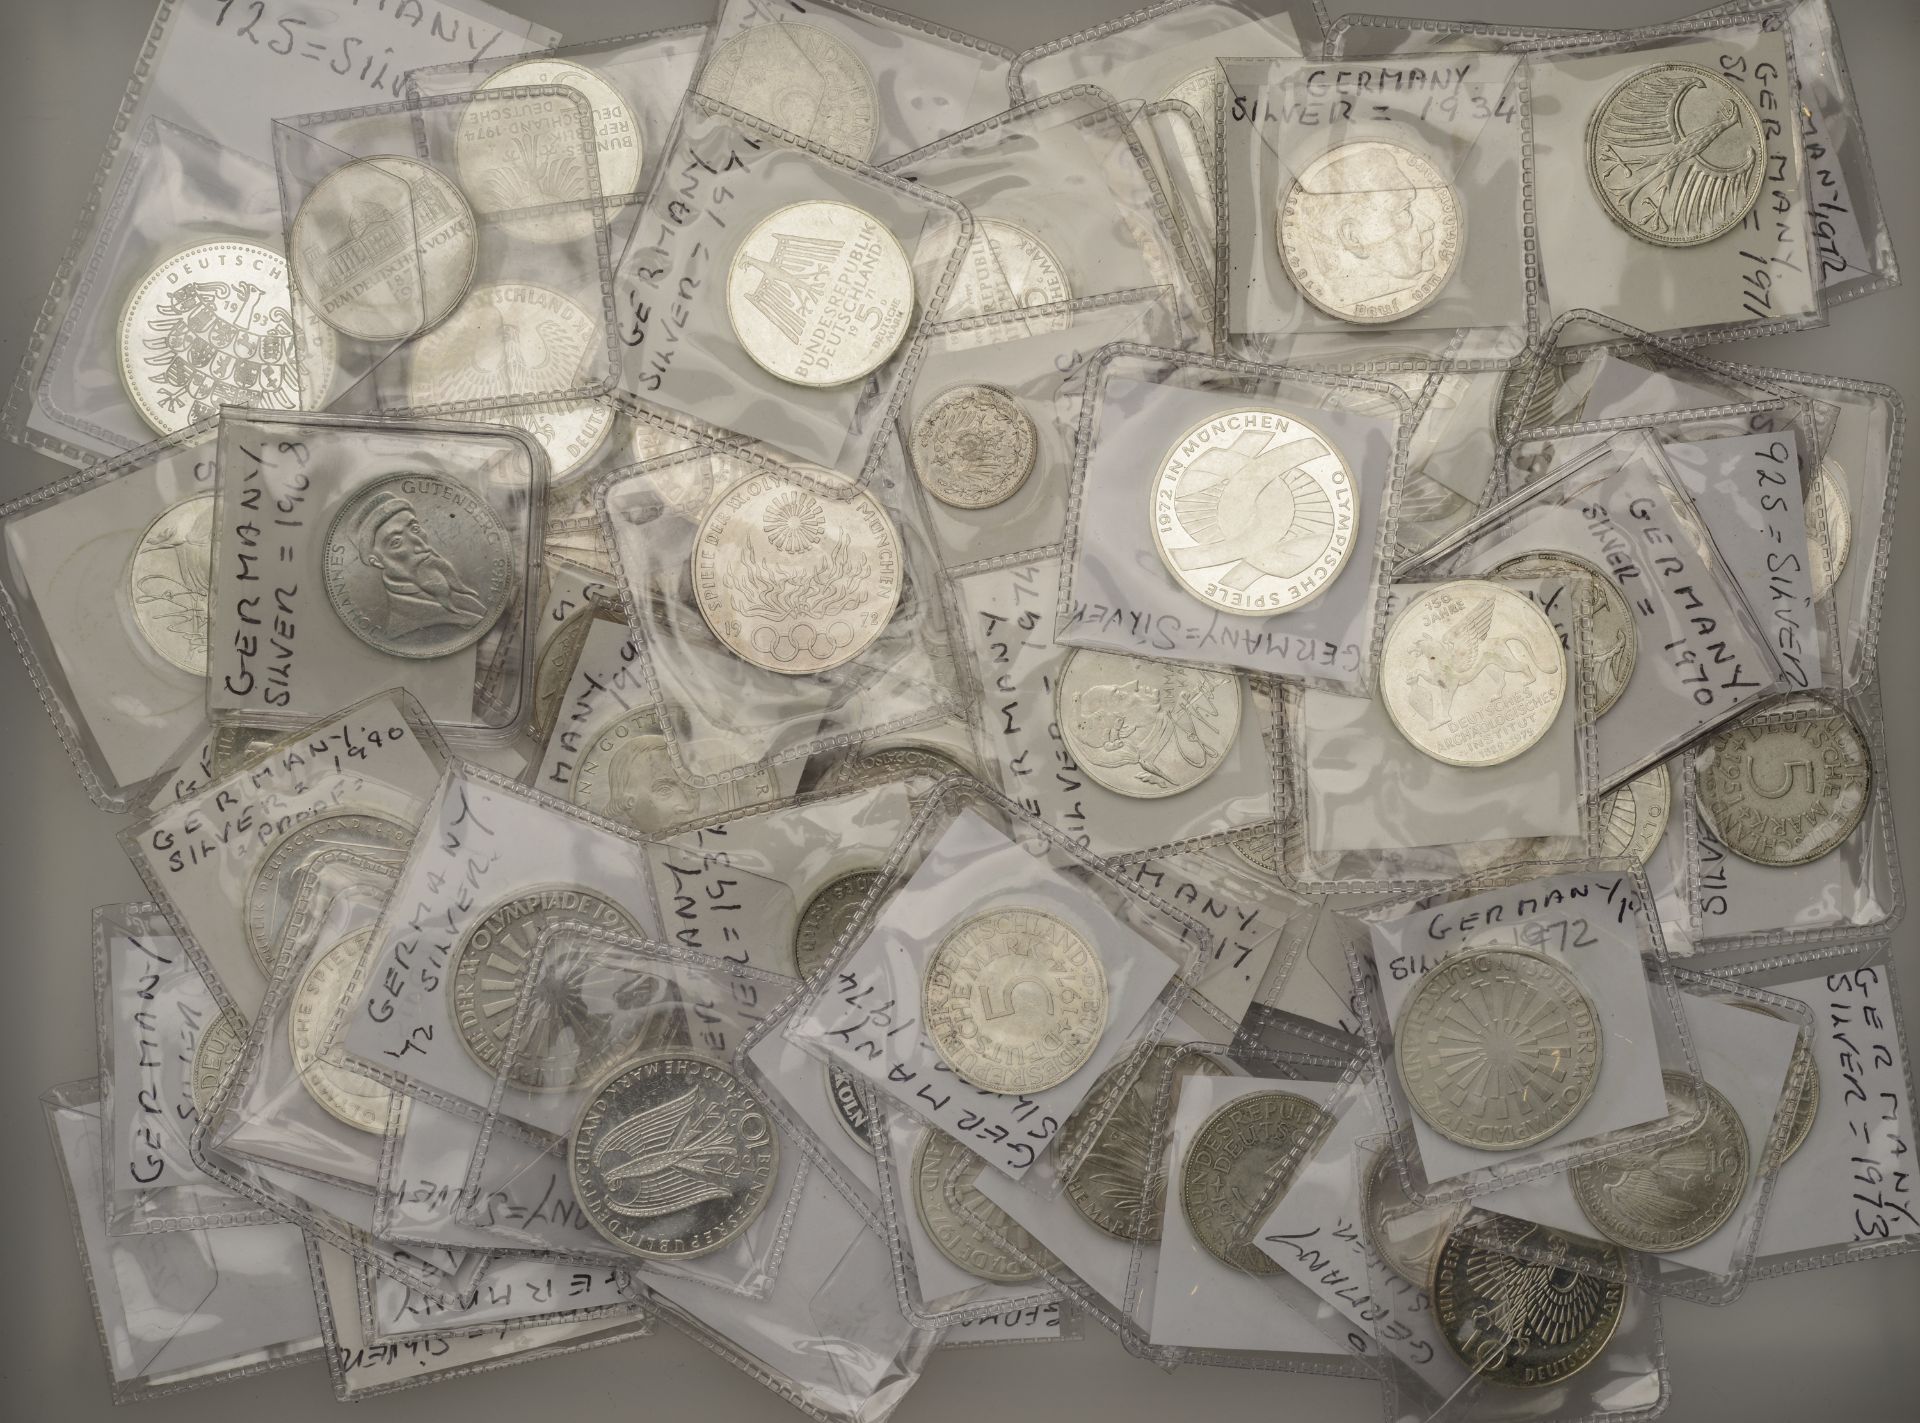 Germany, Assorted German silver coins (106), mostly 20th century commemorative issues [106]....